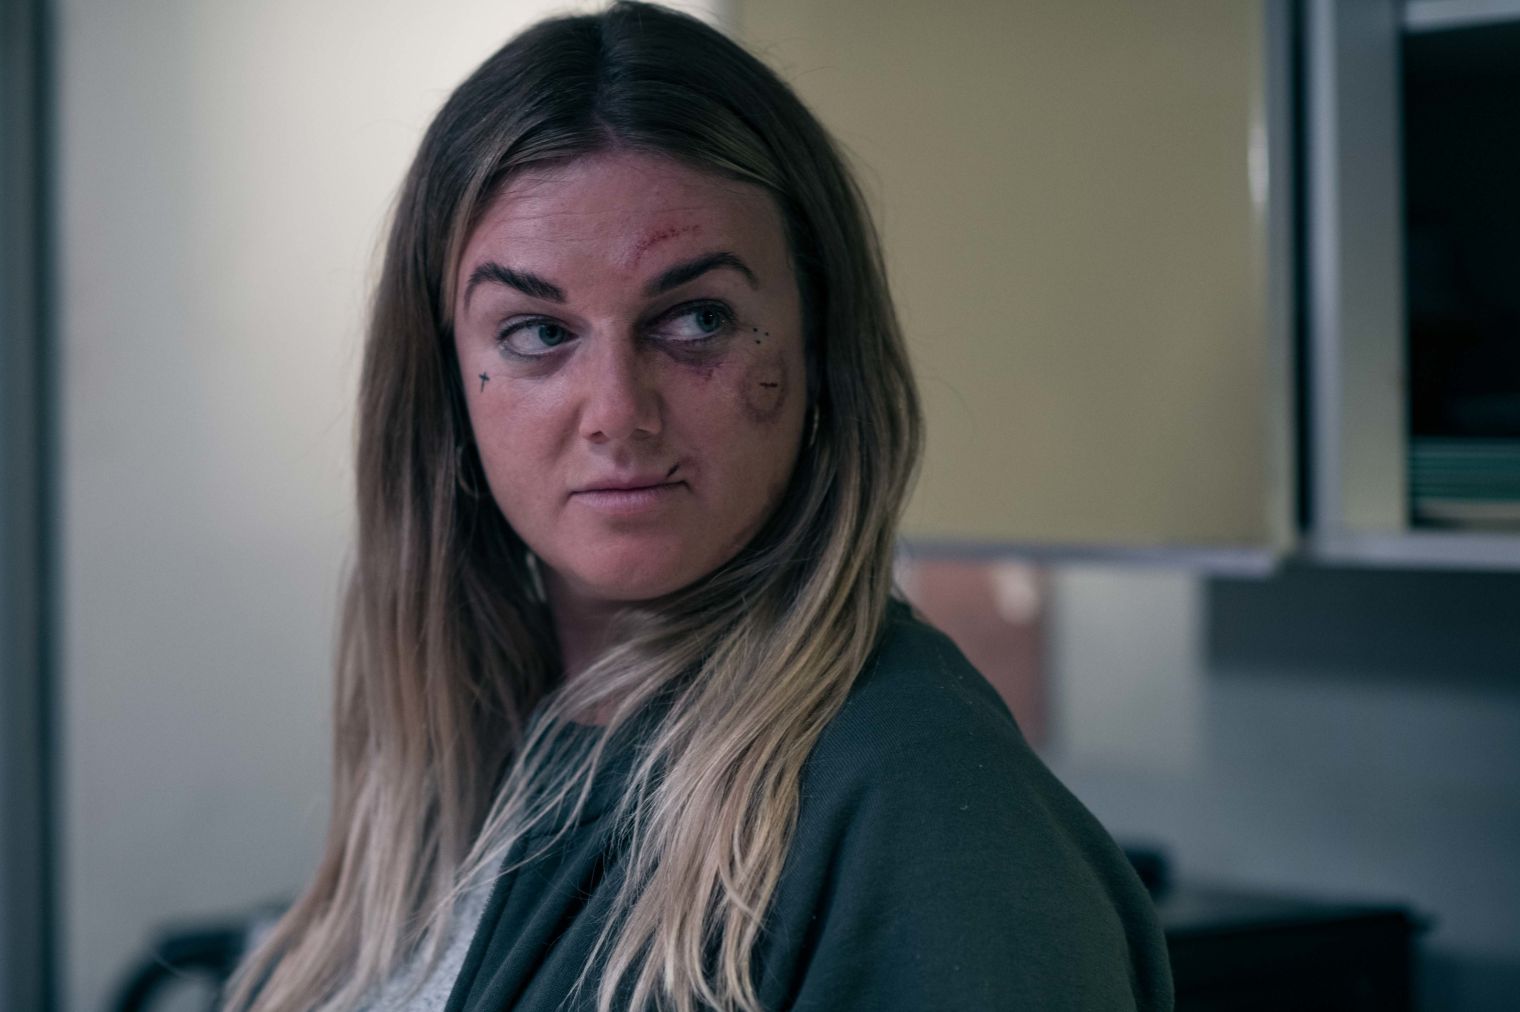 Faye McKeever stars in the second series of BAFTA winning prison drama ’Time’, which starts on BBC One on Sunday night at 9pm